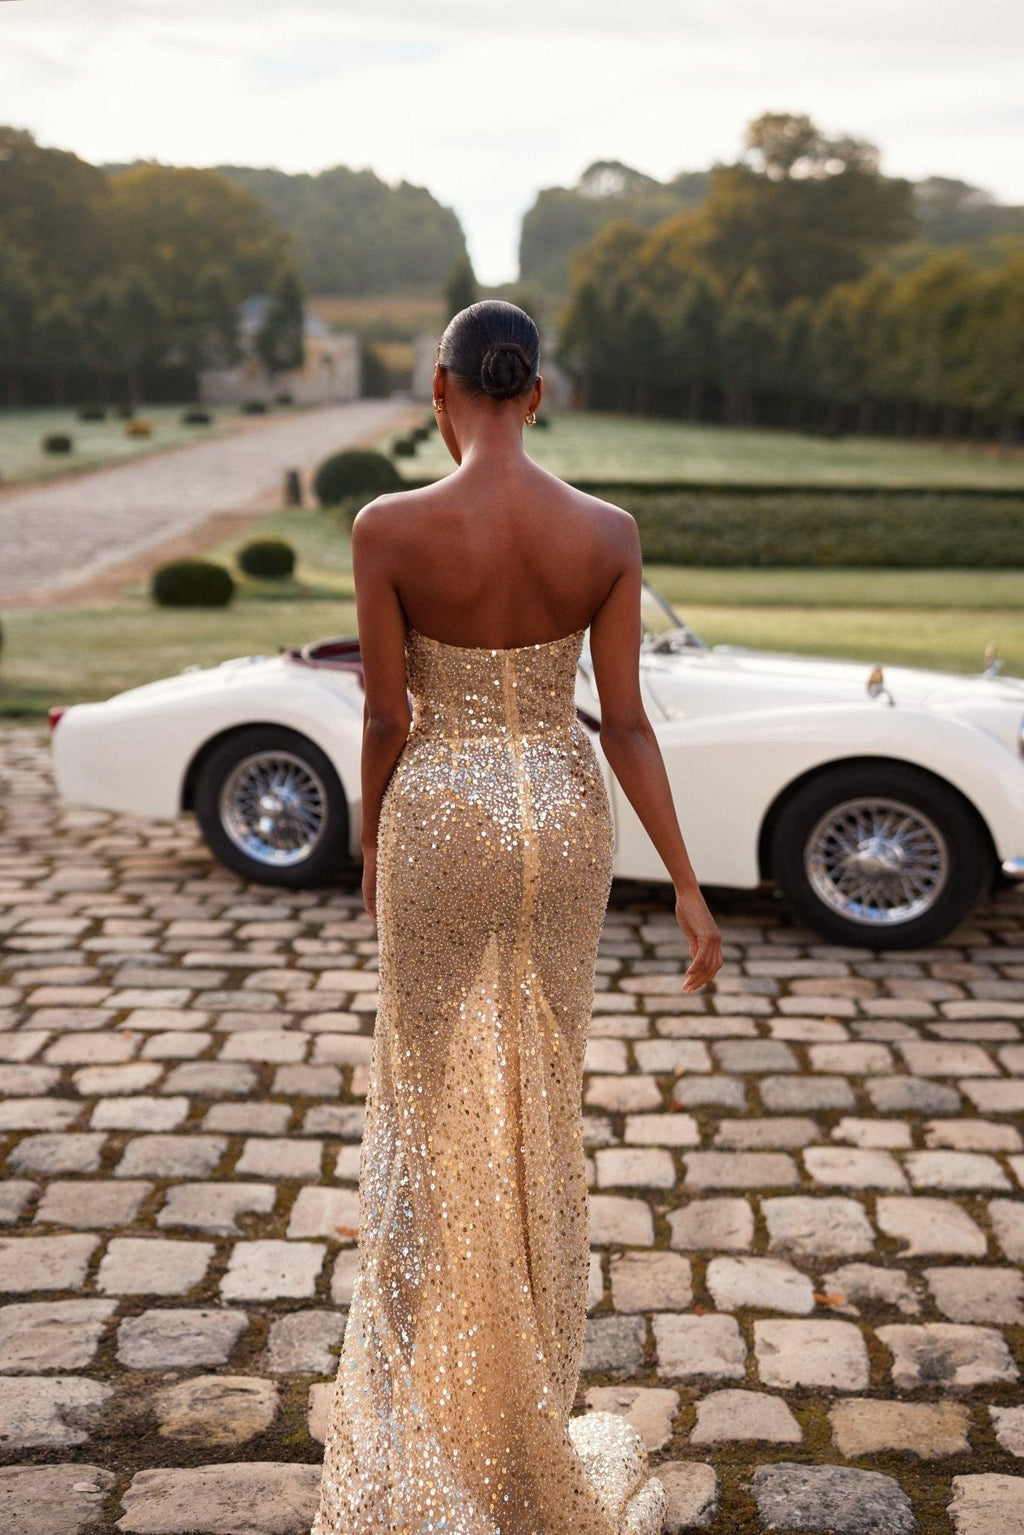 Showstopper maxi dress covered in gold sequins - Milla